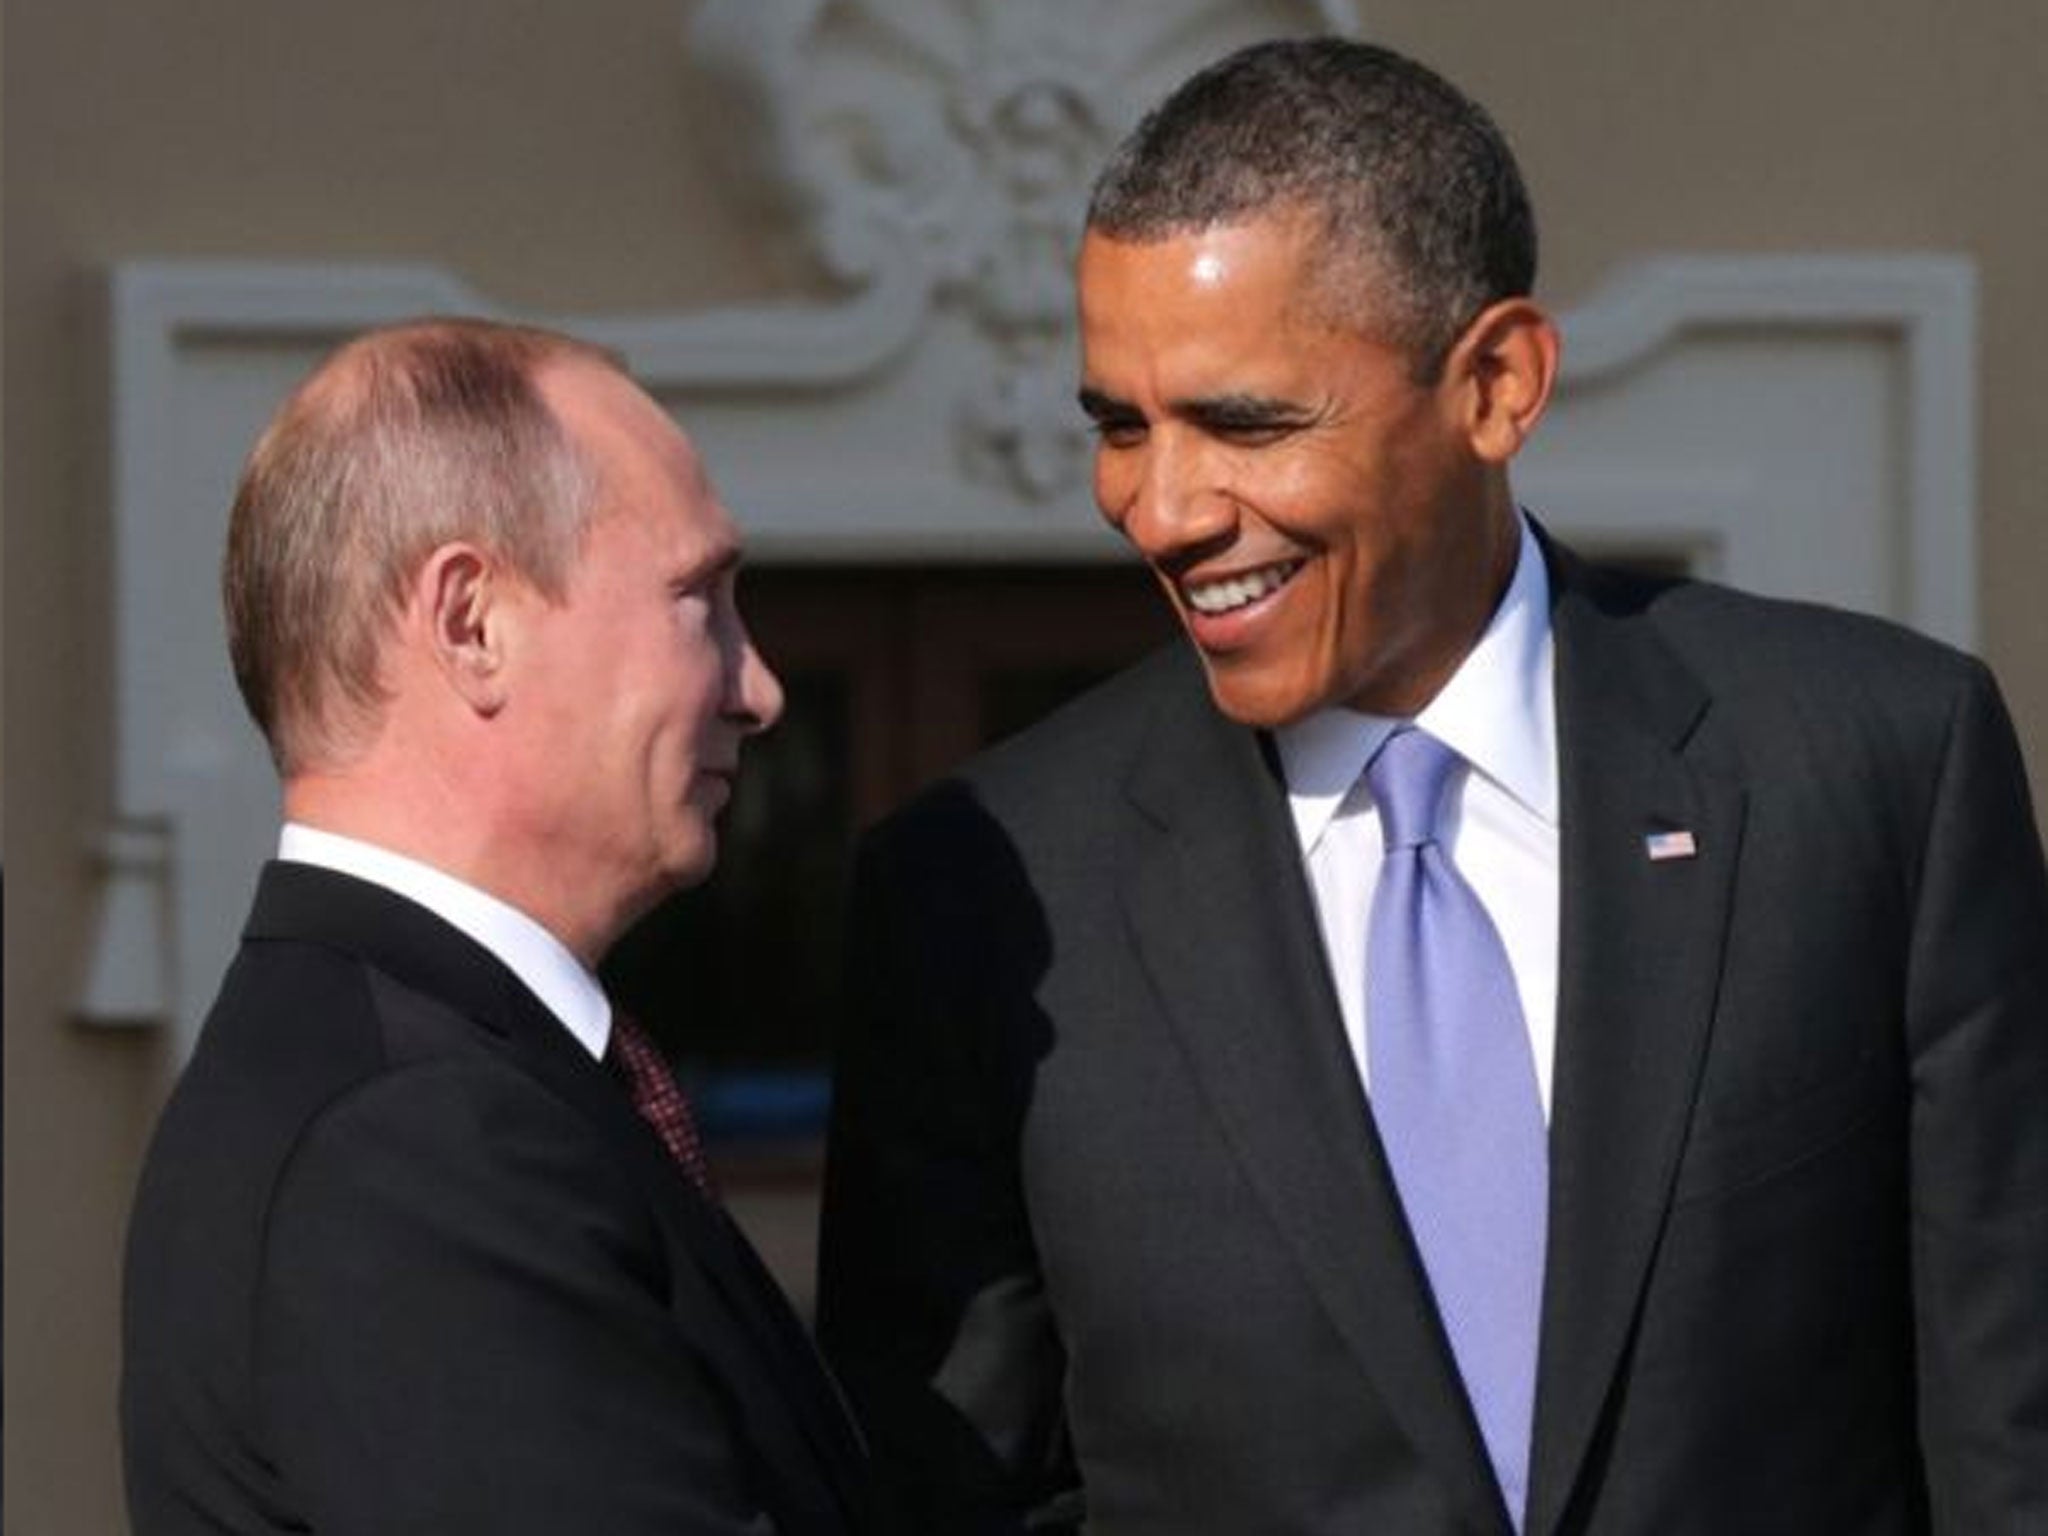 In the game: Vladimir Putin’s Russia is resurgent just as Barack Obama’s US has become weaker